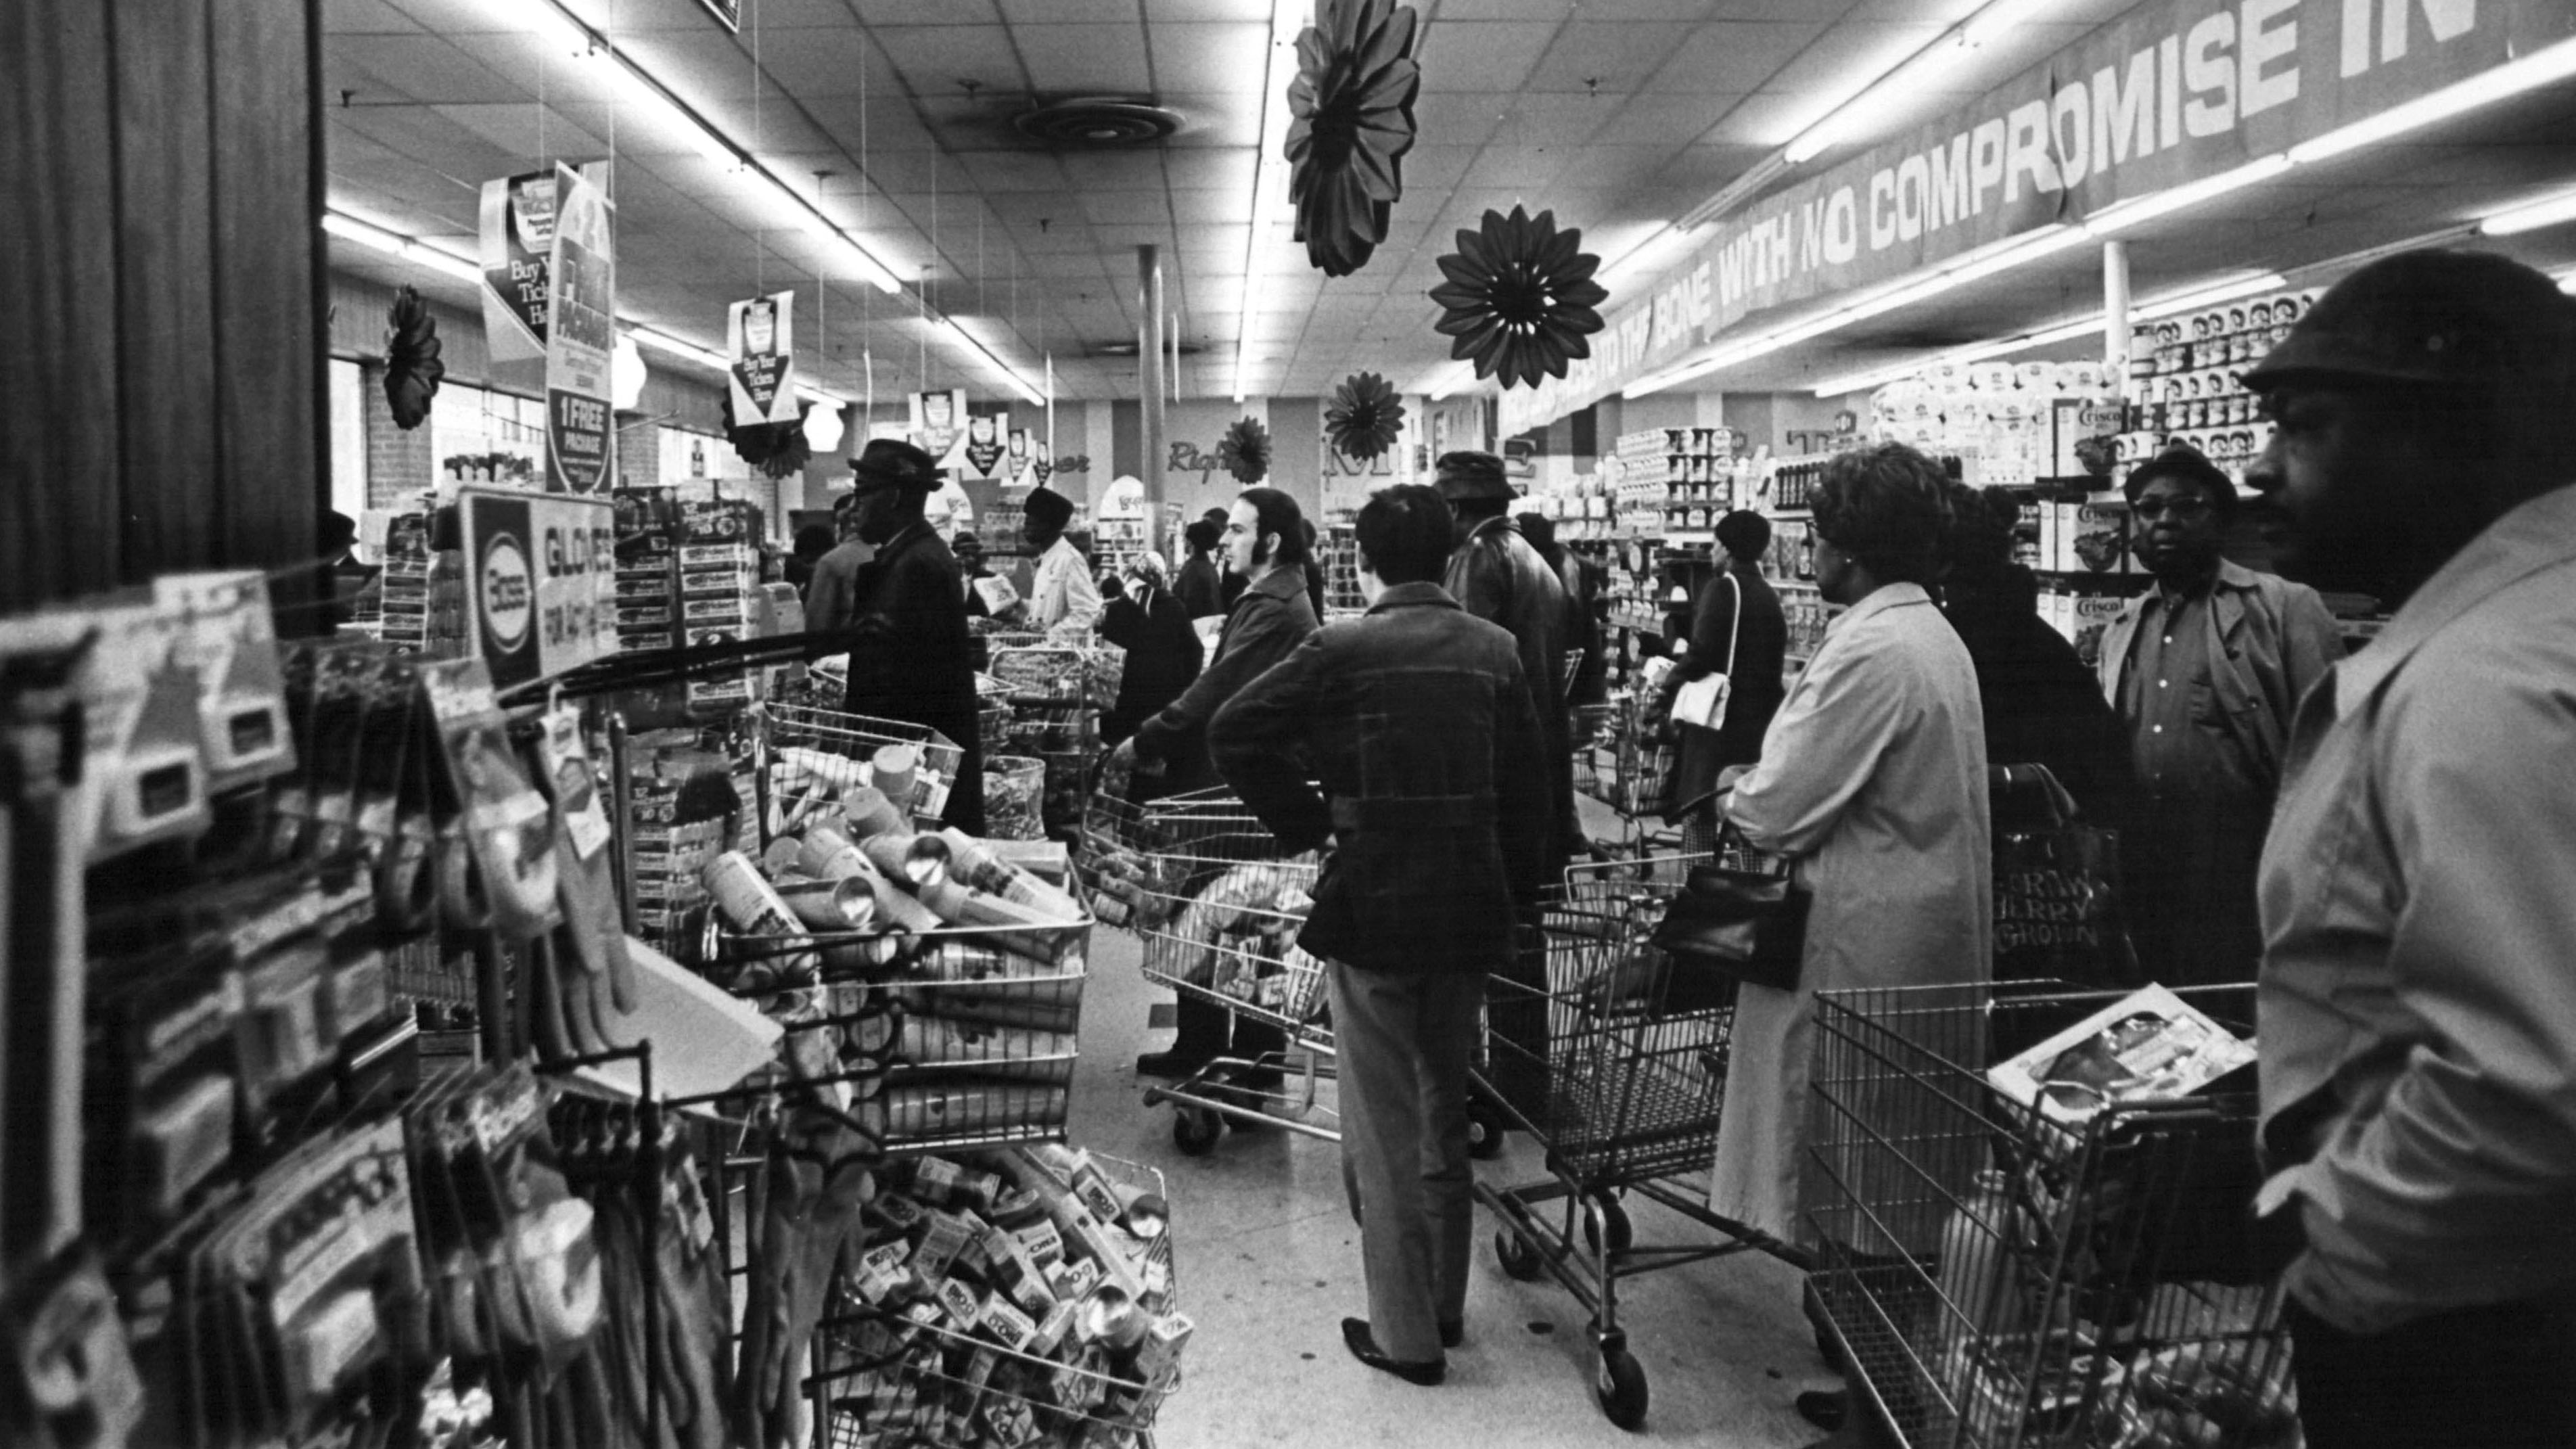 Black and white photo of the first grocery store in the area. Featured are long lines of individual's waiting in line to purchase goods.